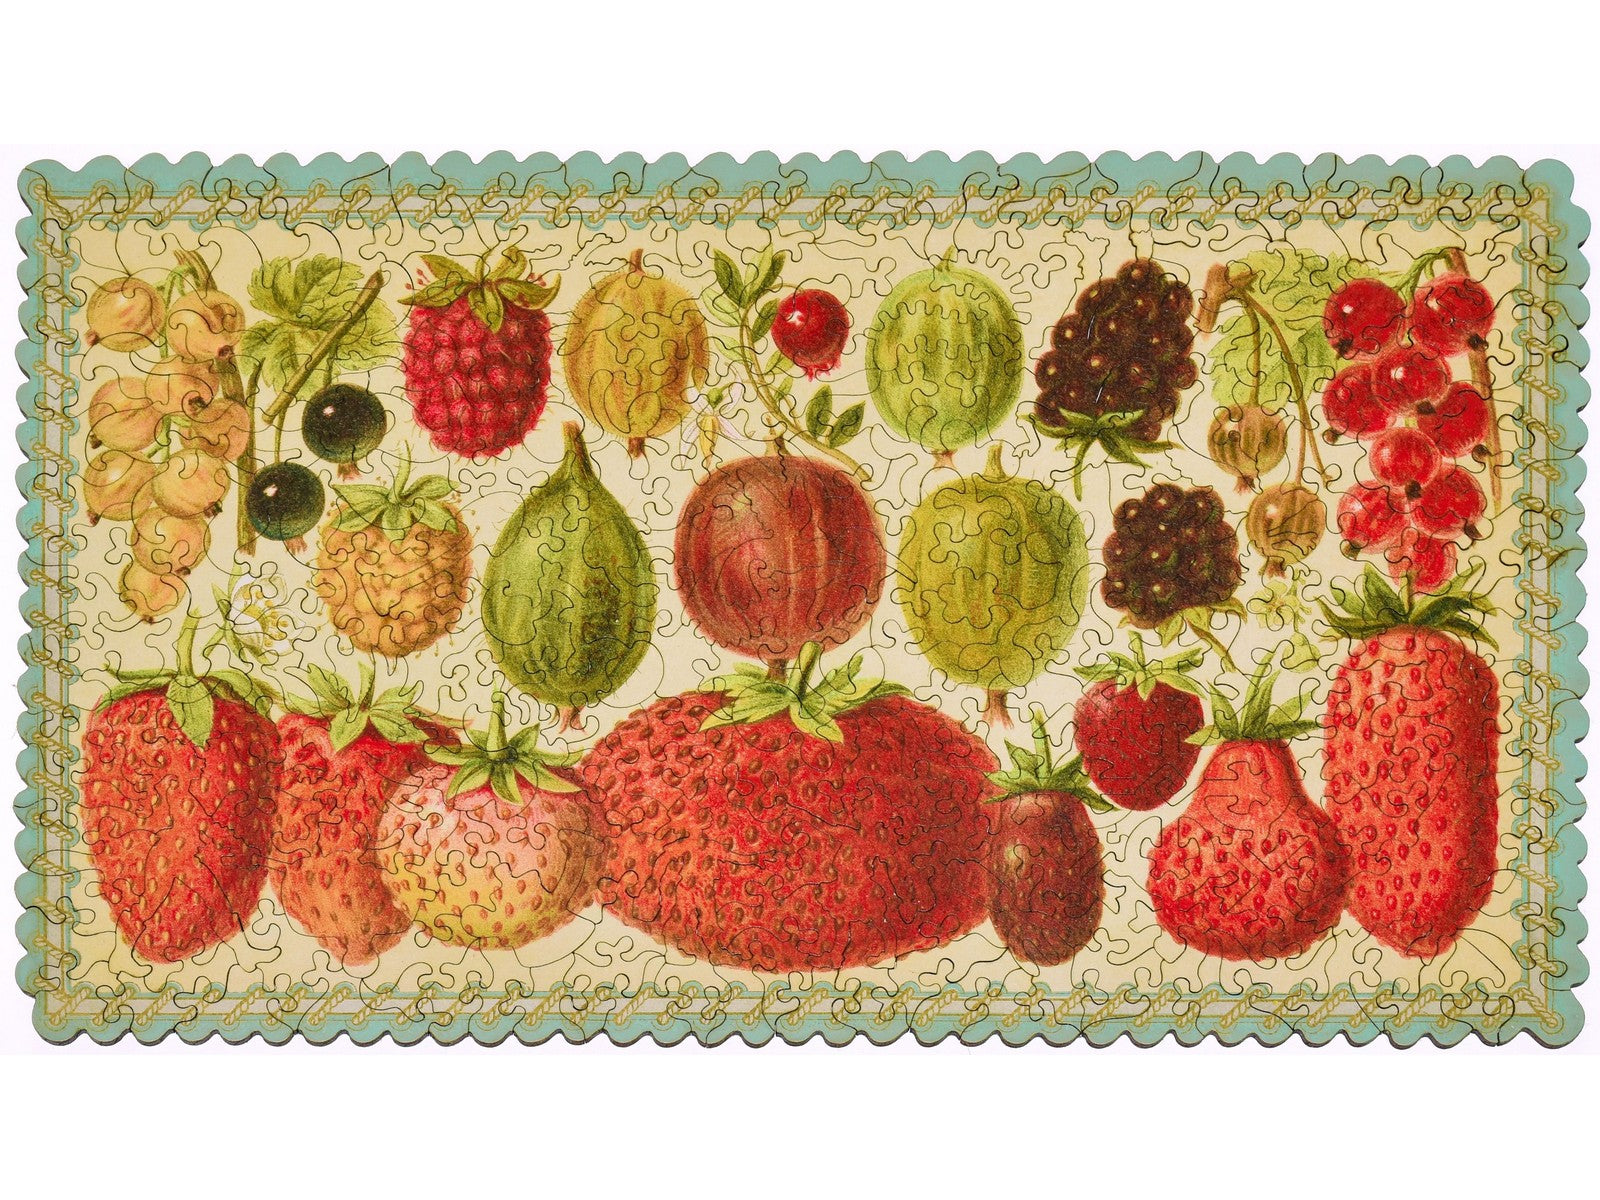 The front of the puzzle, Heirloom Berry Assortment, which shows a botanical print of different kinds of berries.